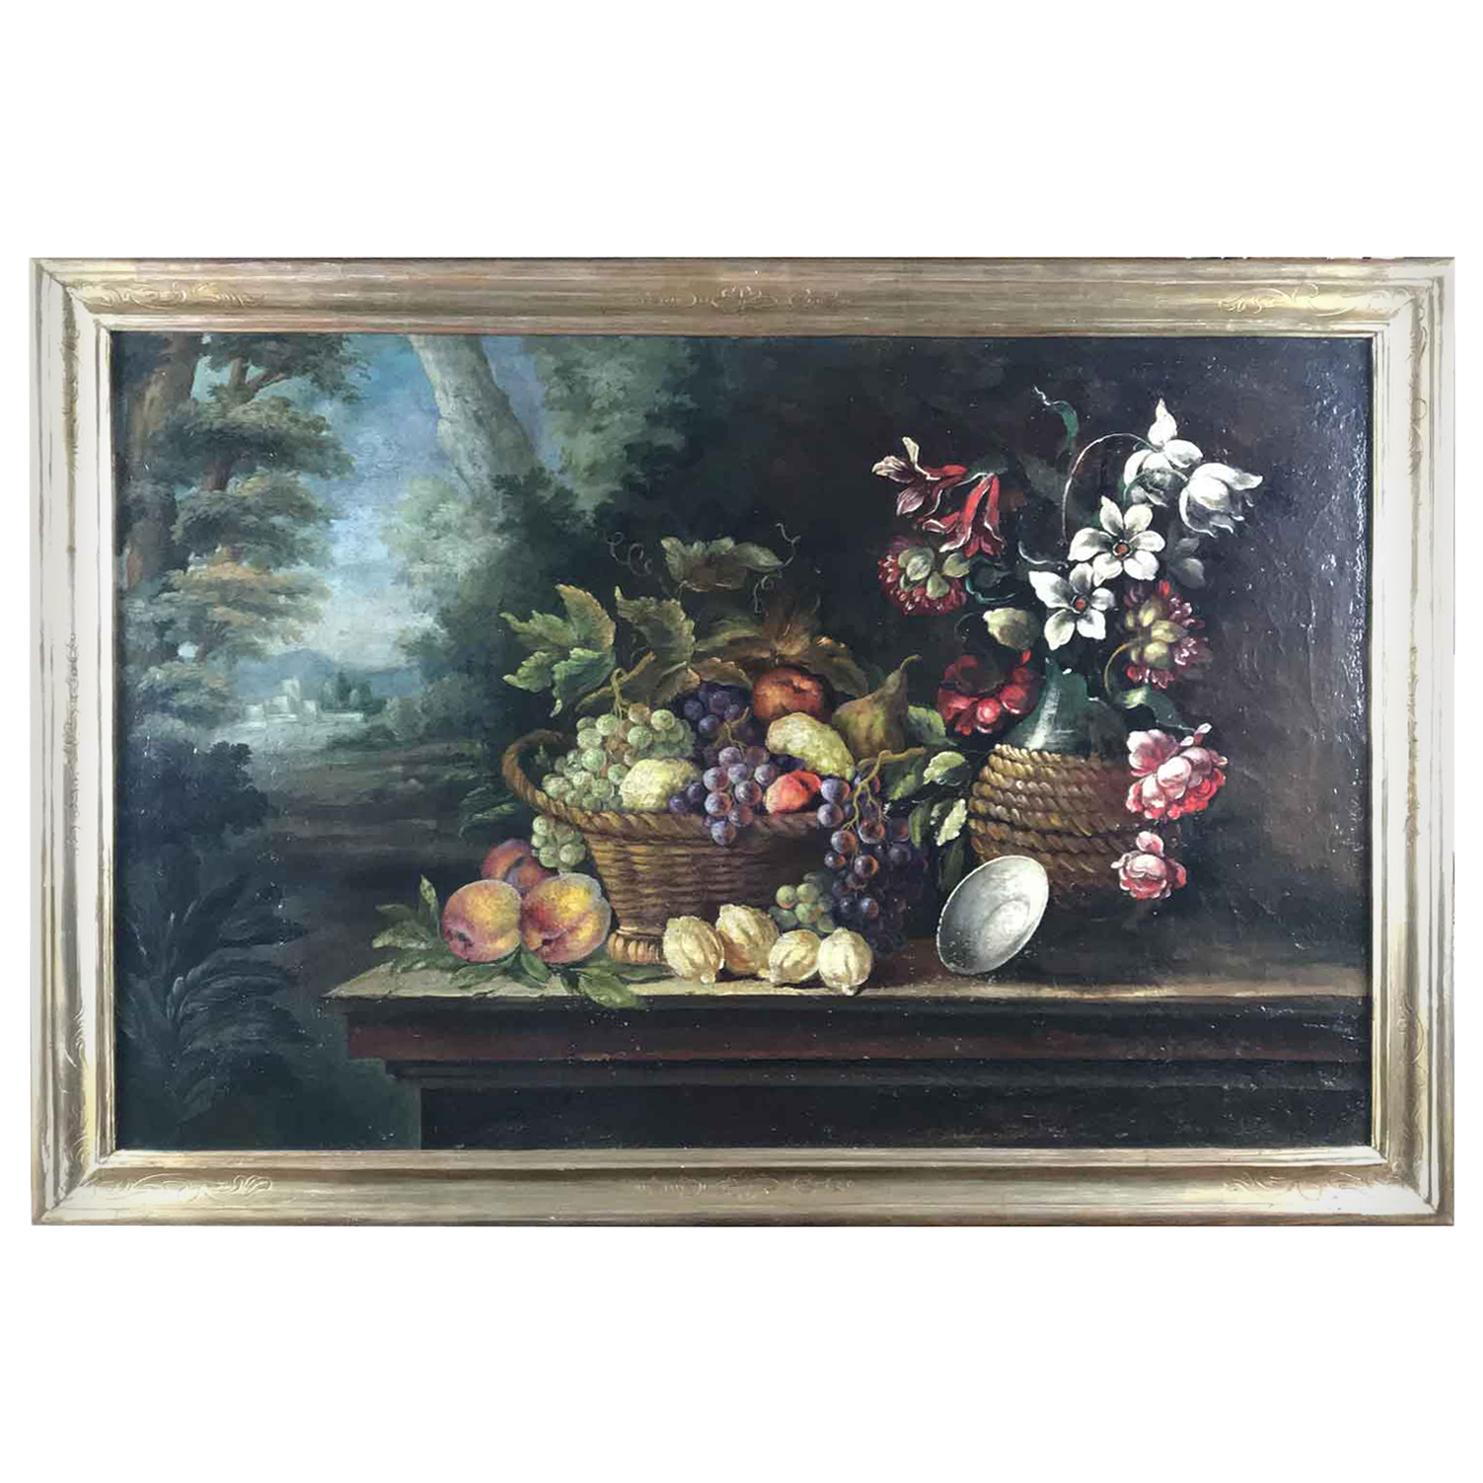 20th Century Italian Still Life of Flowers Fruits and Landscape